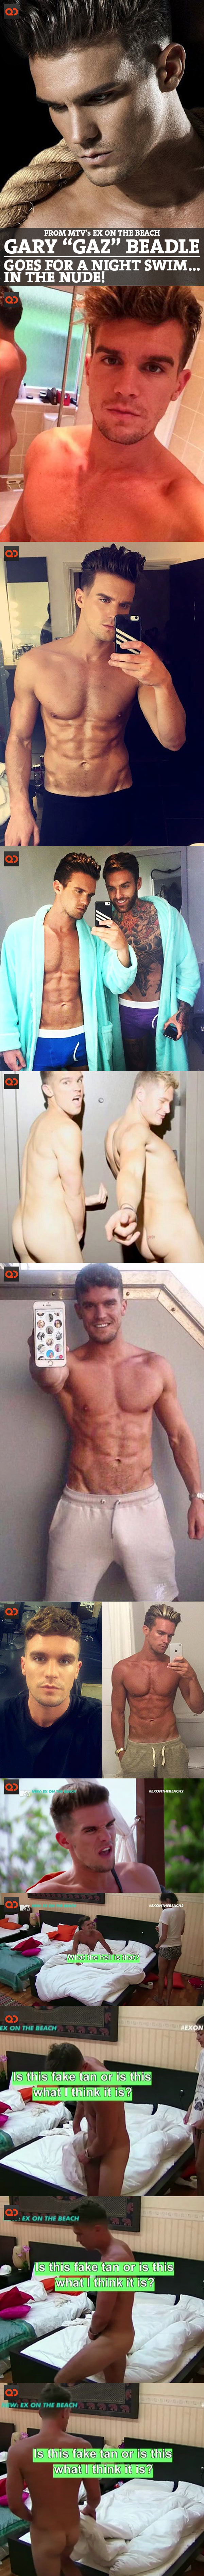 Gary “Gaz” Beadly, From Ex On The Beach, Goes For A Night Swim In The Nude!